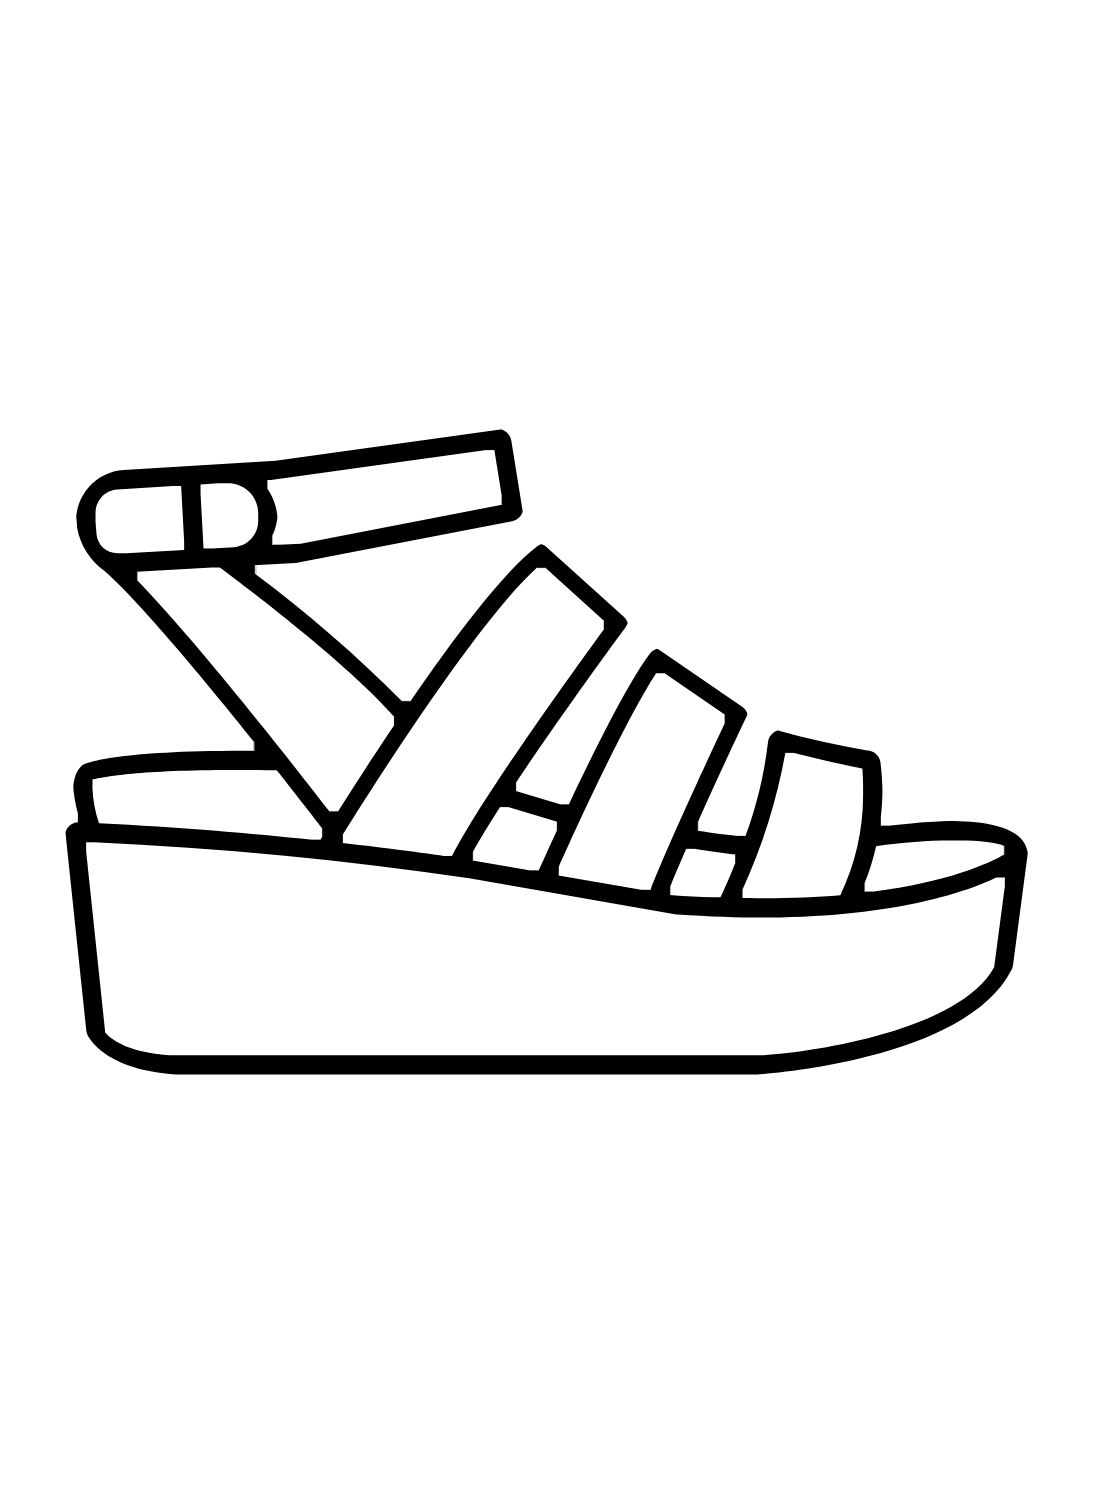 Sandals Drawing Coloring Page